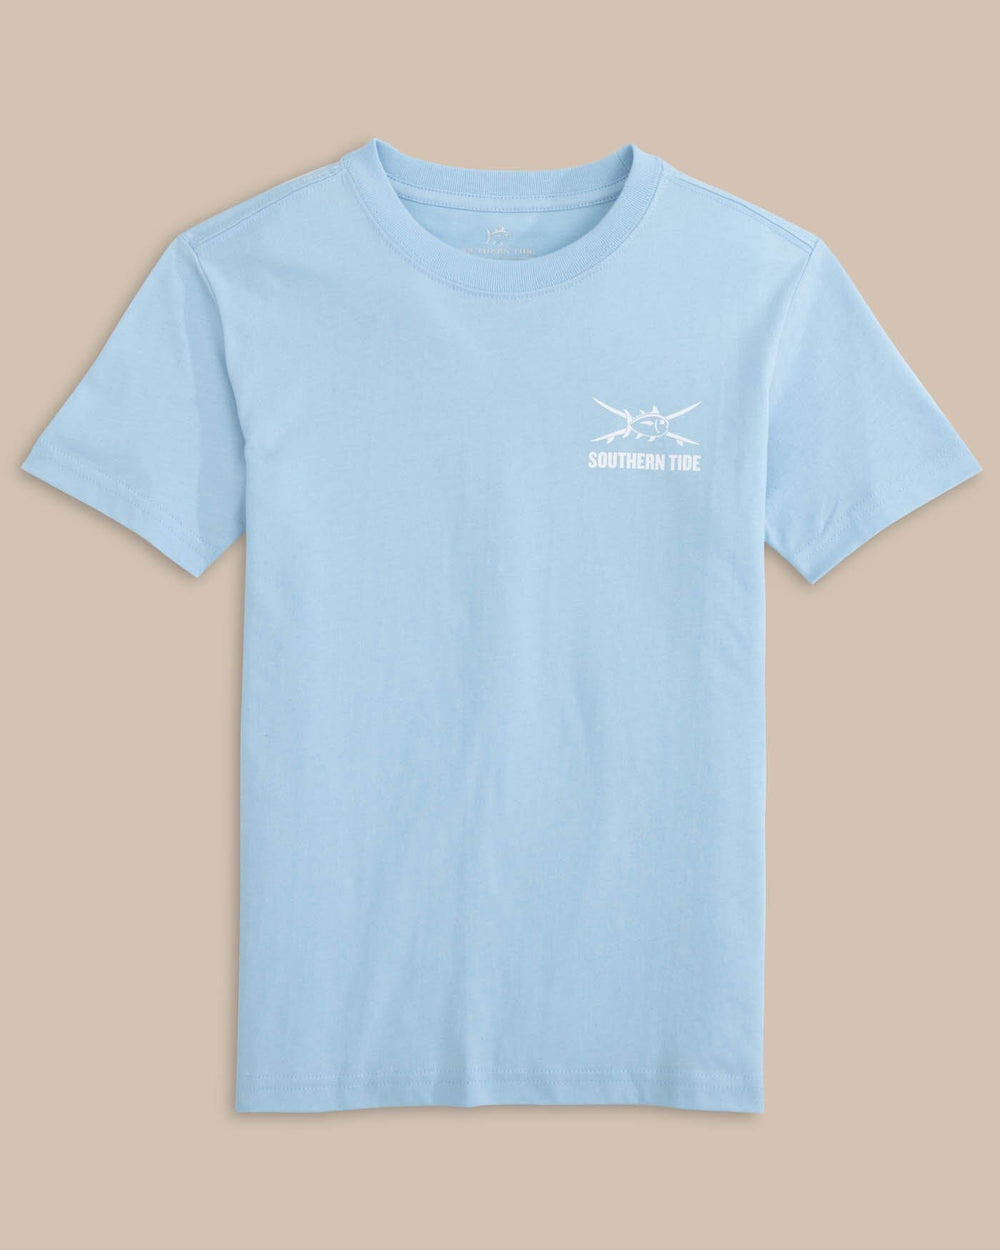 The front view of the Southern Tide Kids Surf Style Short Sleeve T-shirt by Southern Tide - Clearwater Blue